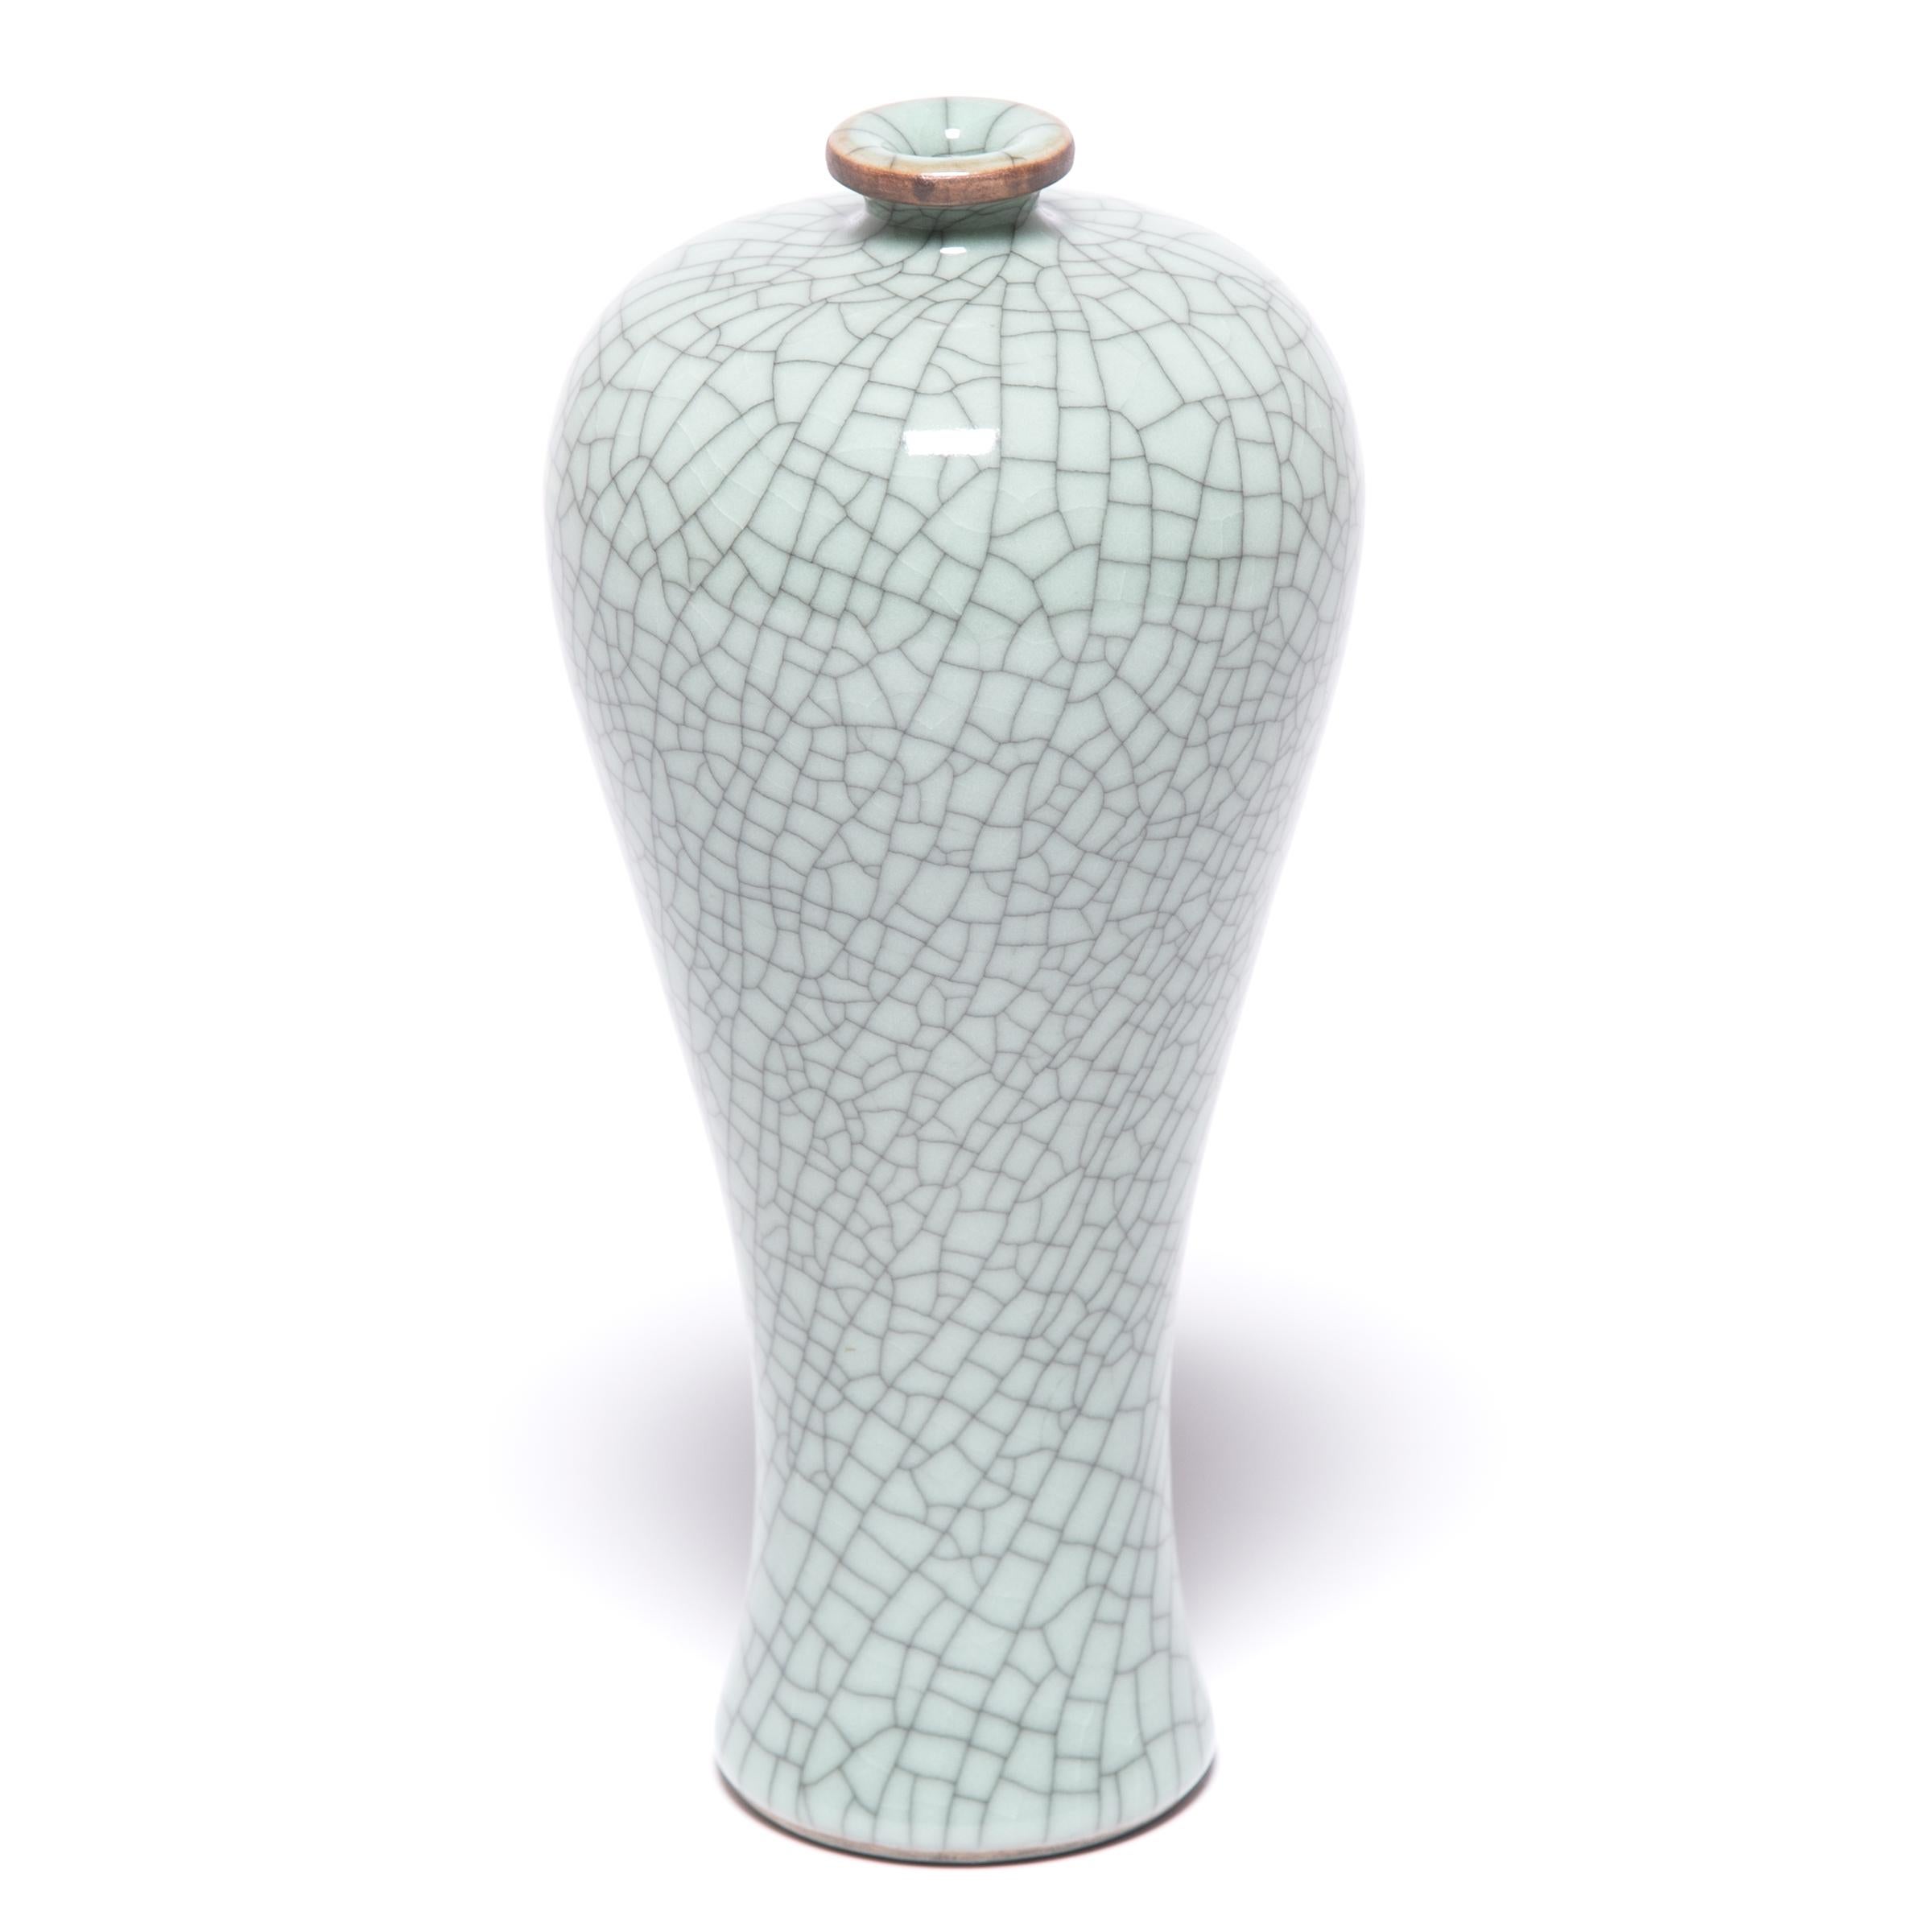 This contemporary vase hearkens to the classic meiping form, traditionally used to display flowering plum branches. Master ceramic artists in Zhejiang beautifully create the distinctive crackle glaze of traditional Guan and Ge ware, allowing the